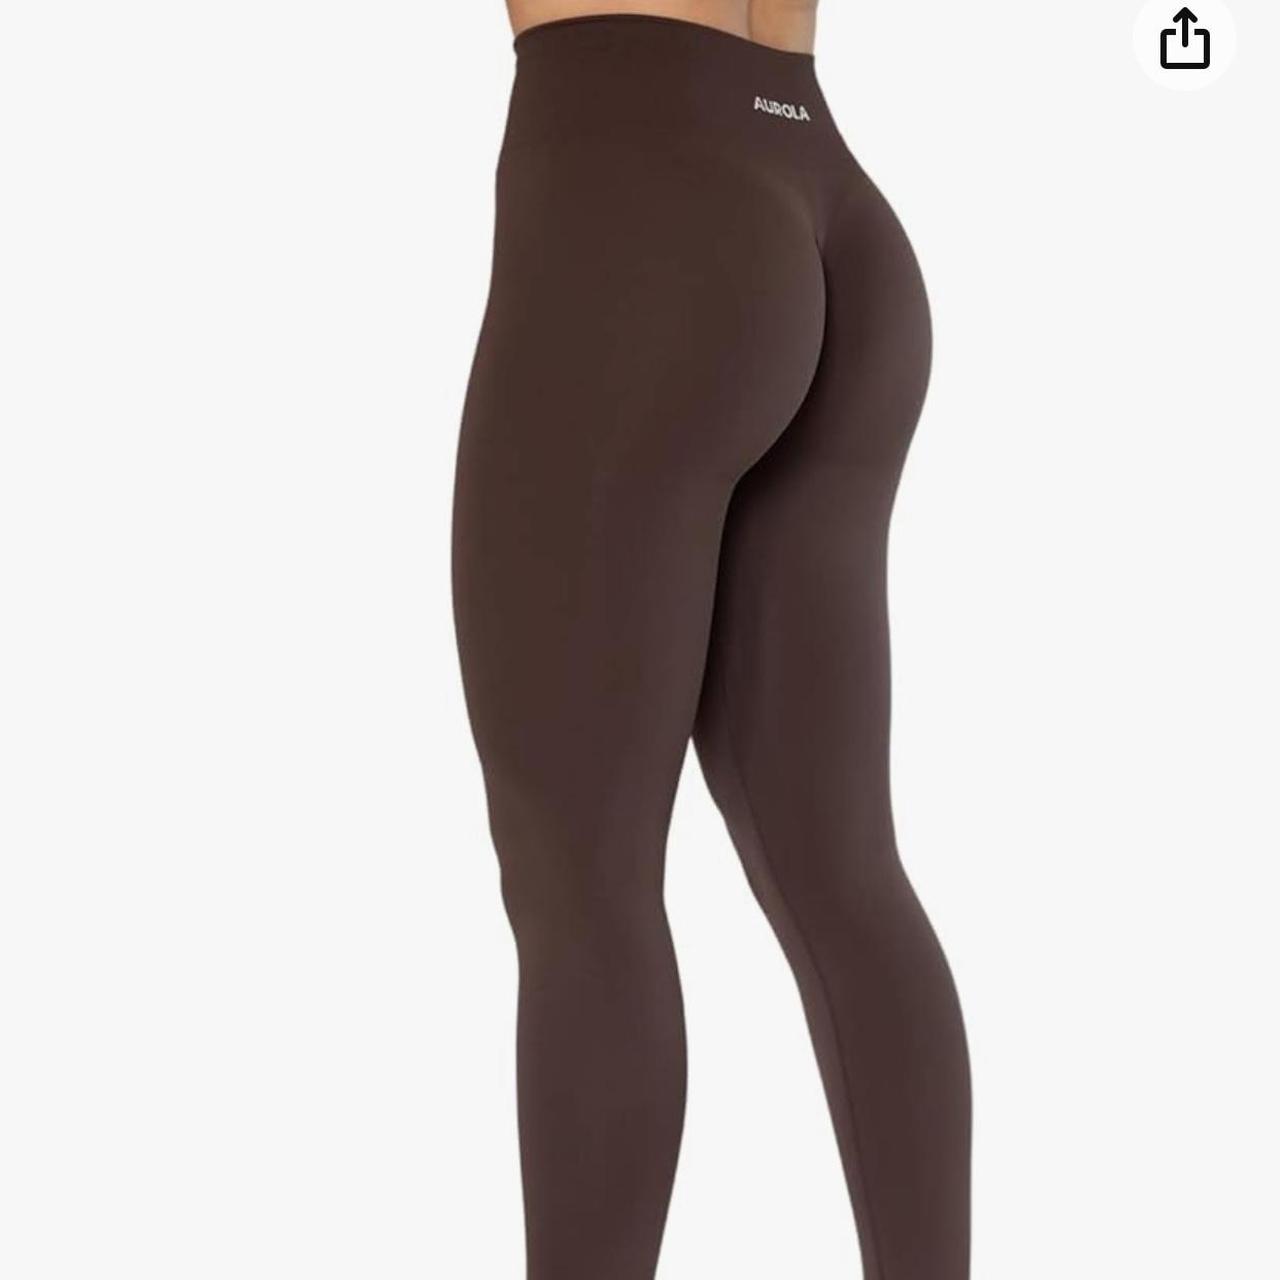 Selling my khaki green Aimn gym tights because I - Depop